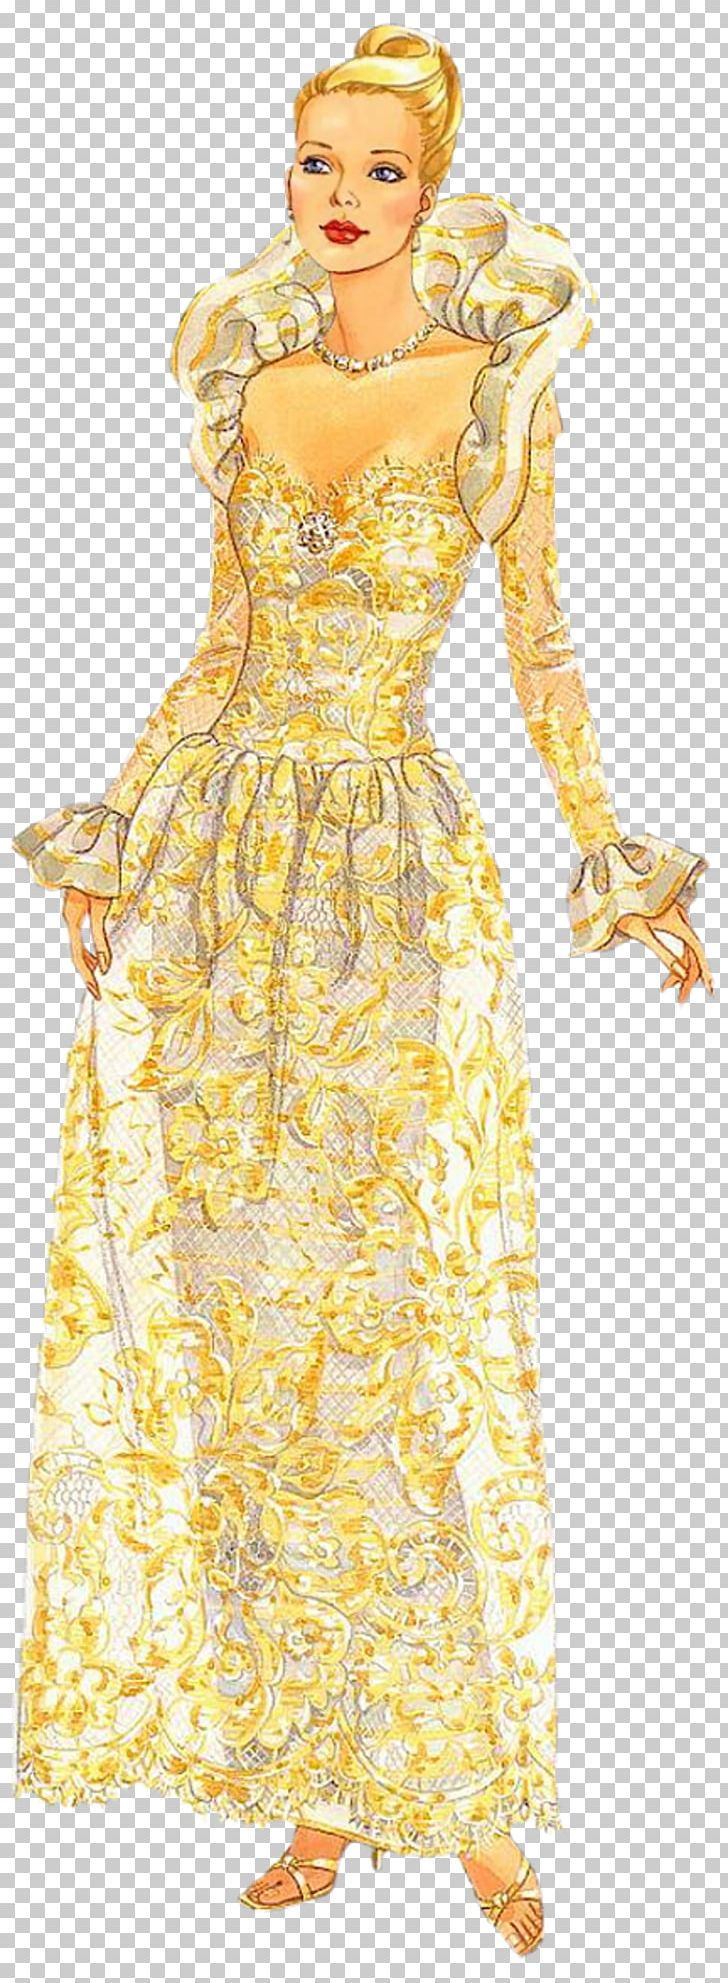 Costume Design Human Hair Color Gown PNG, Clipart, Character, Clothing, Color, Costume, Costume Design Free PNG Download